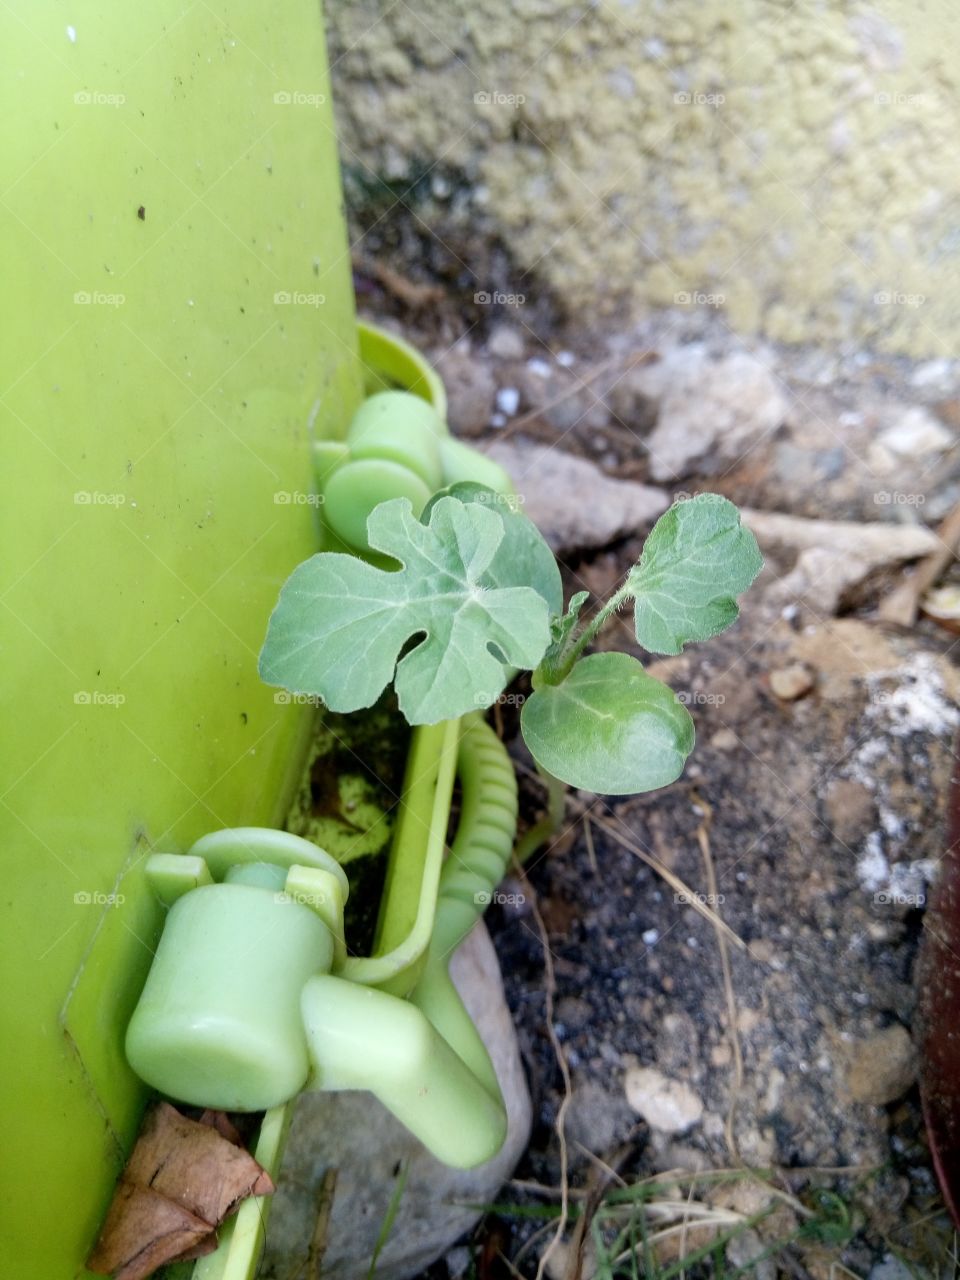 watermelon sprout